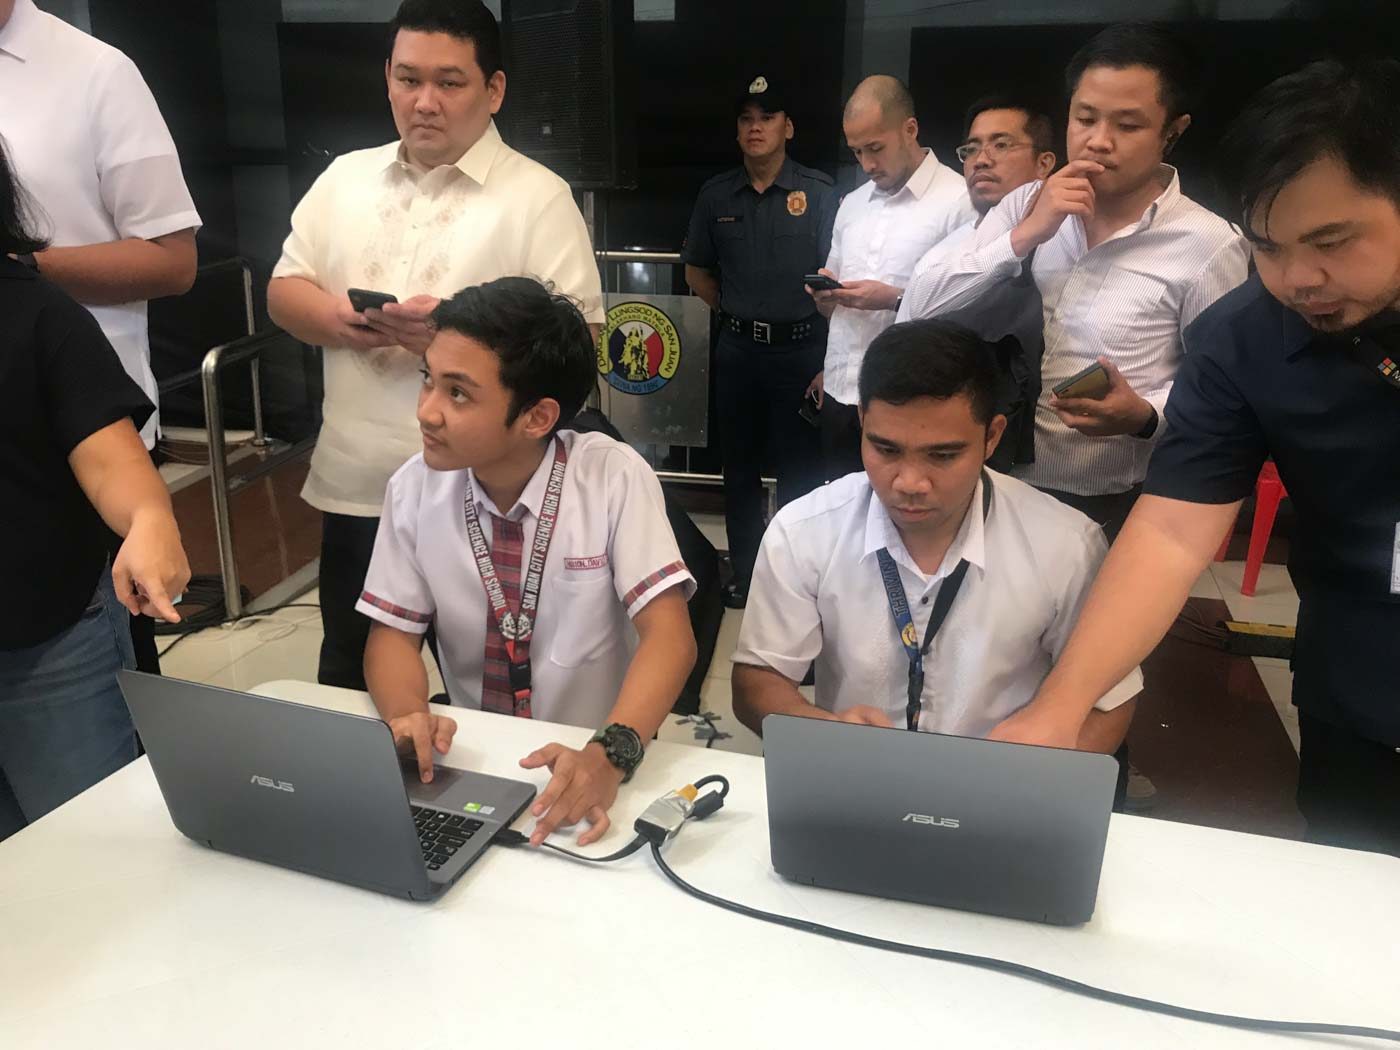 Free Wi-Fi For All Program rolls out in San Juan City